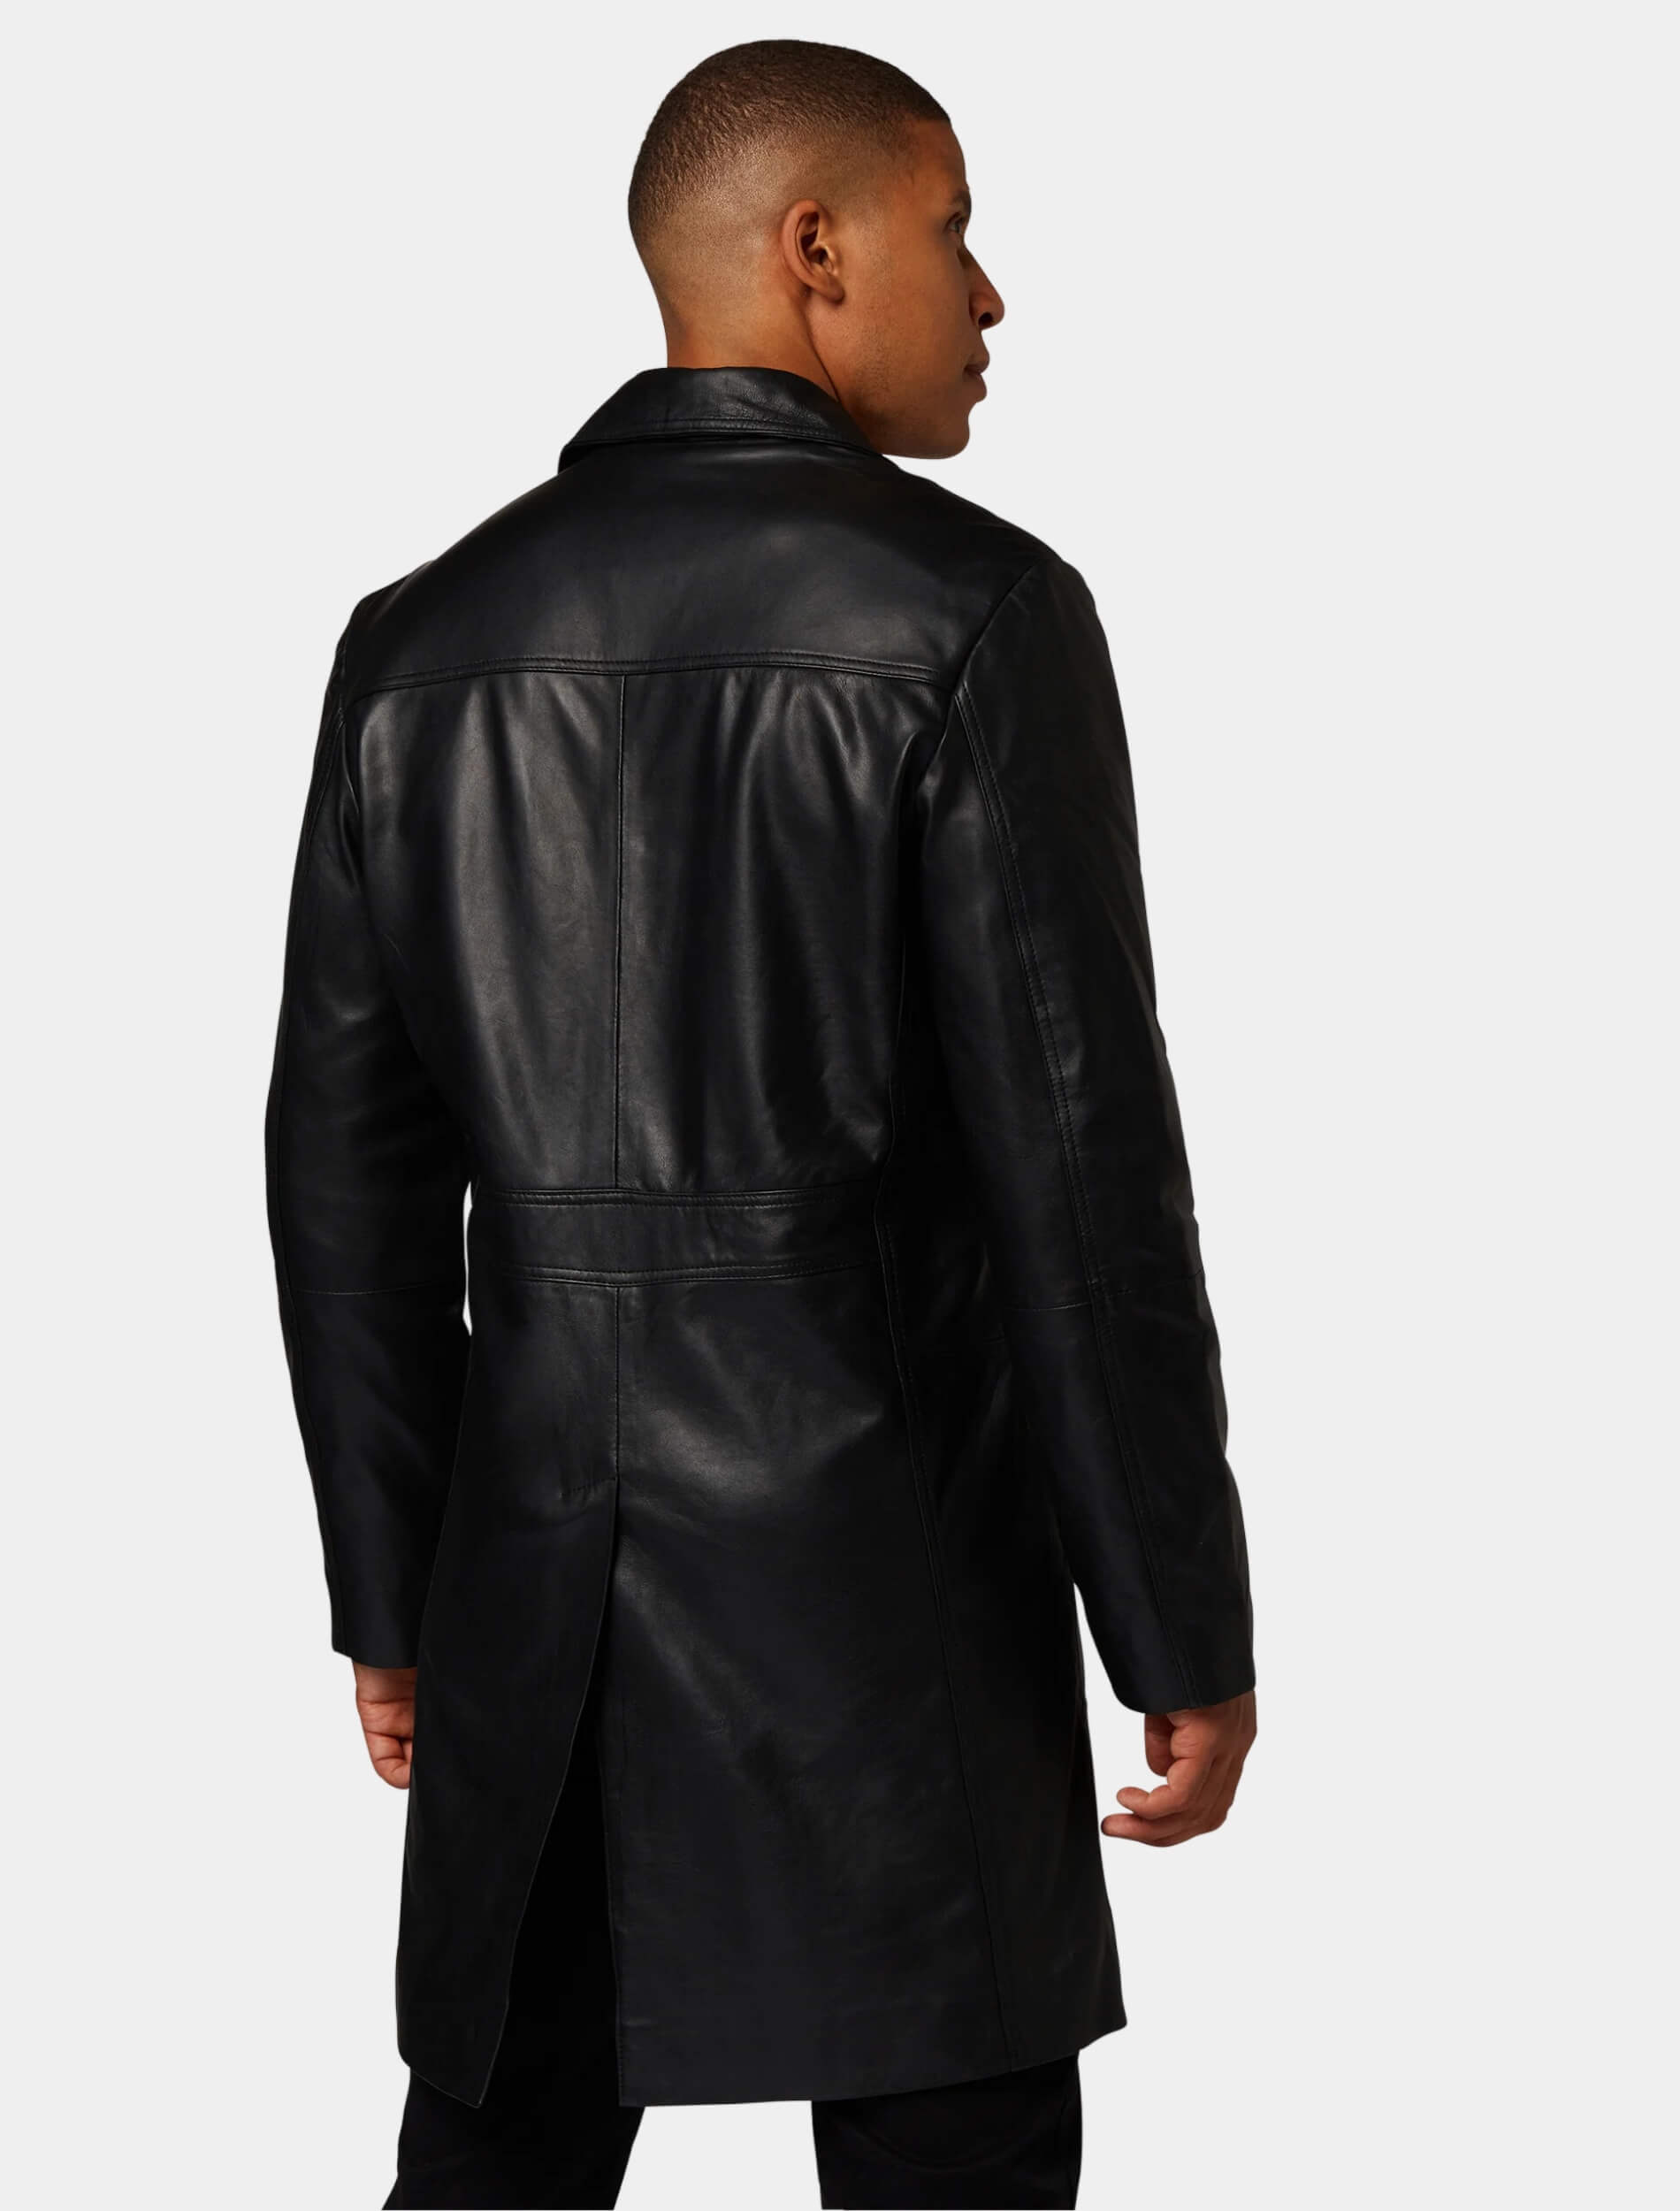 Mens Classy Black Leather Trench Coat Back